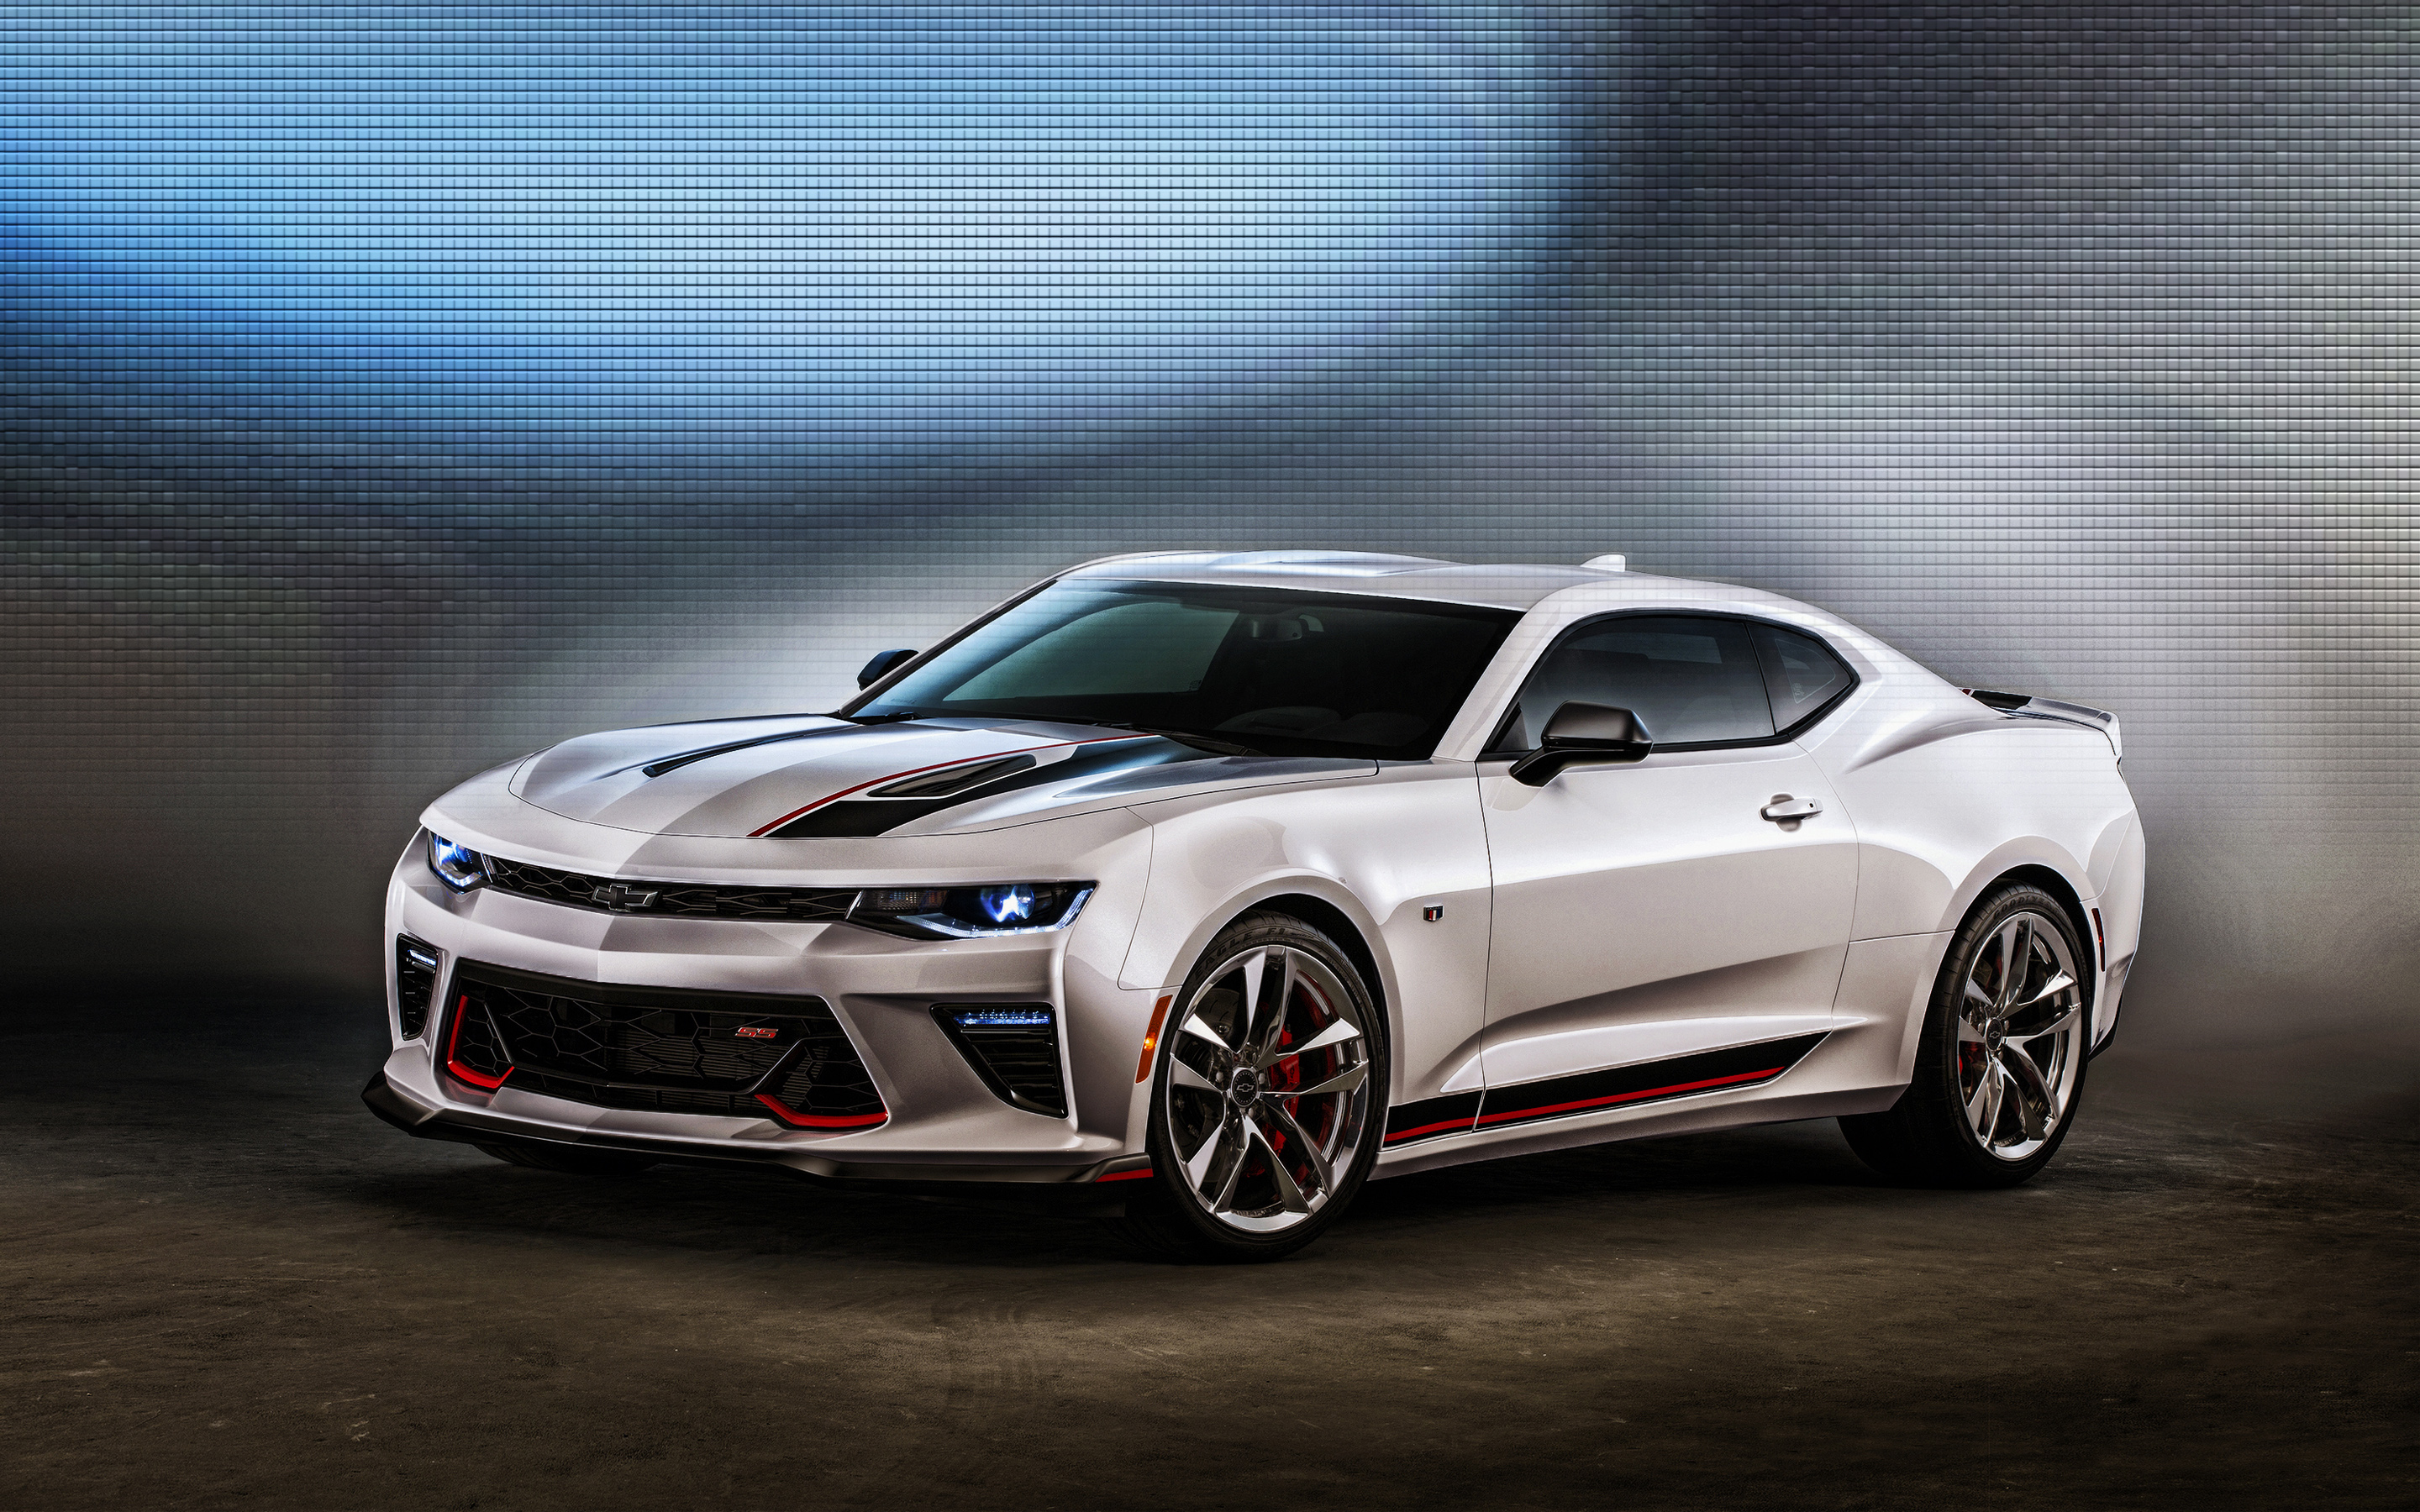 2016 Chevrolet Camaro SS Concept Wallpapers HD Wallpapers